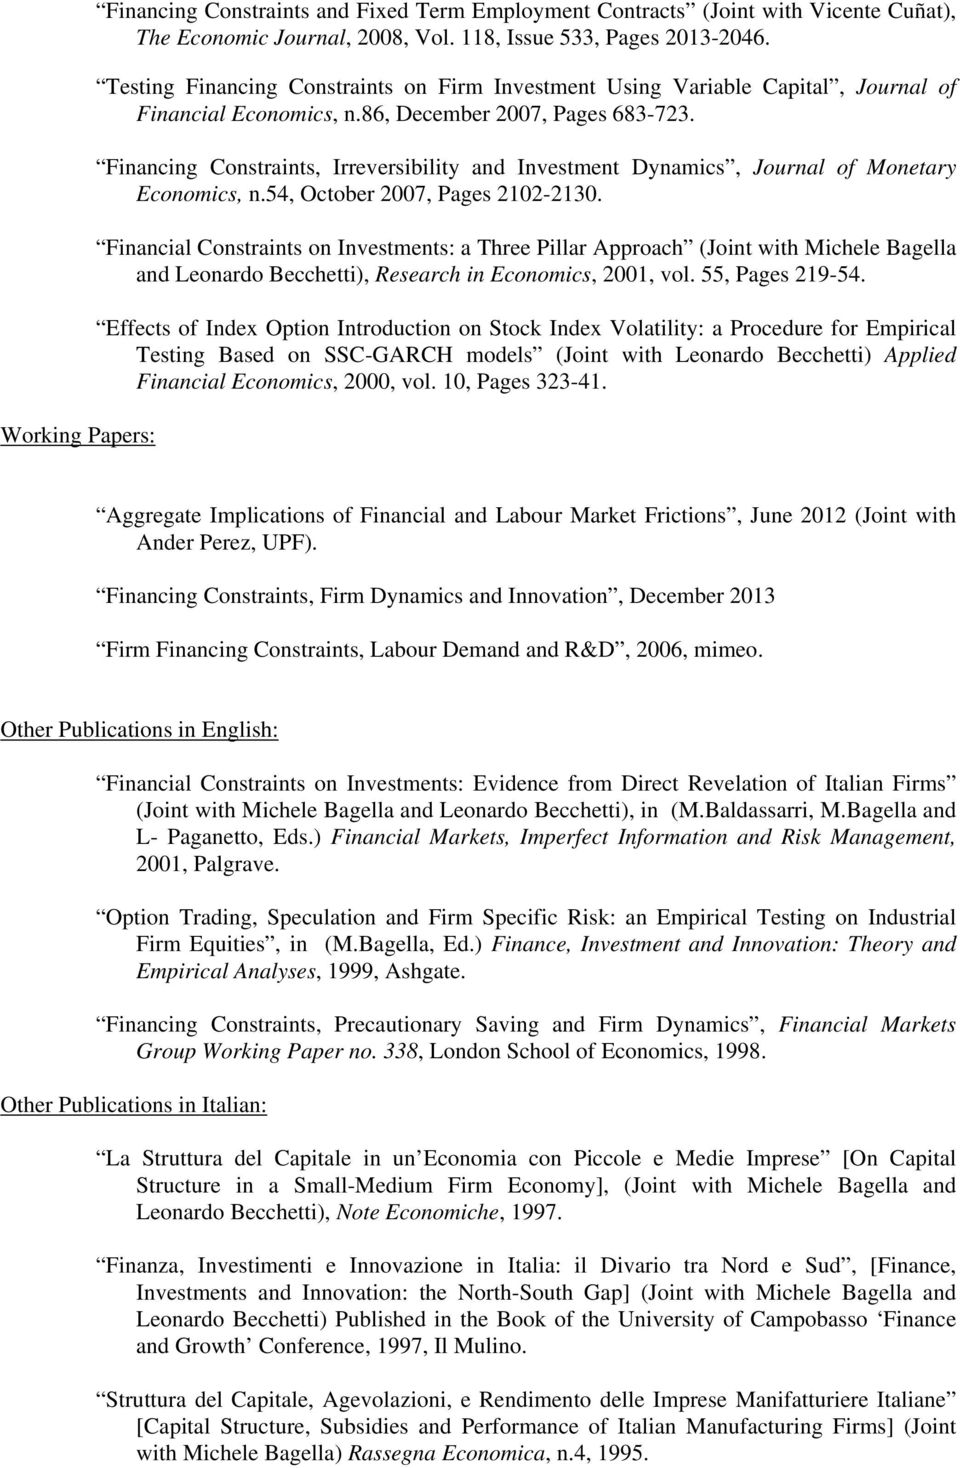 Financing Constraints, Irreversibility and Investment Dynamics, Journal of Monetary Economics, n.54, October 2007, Pages 2102-2130.